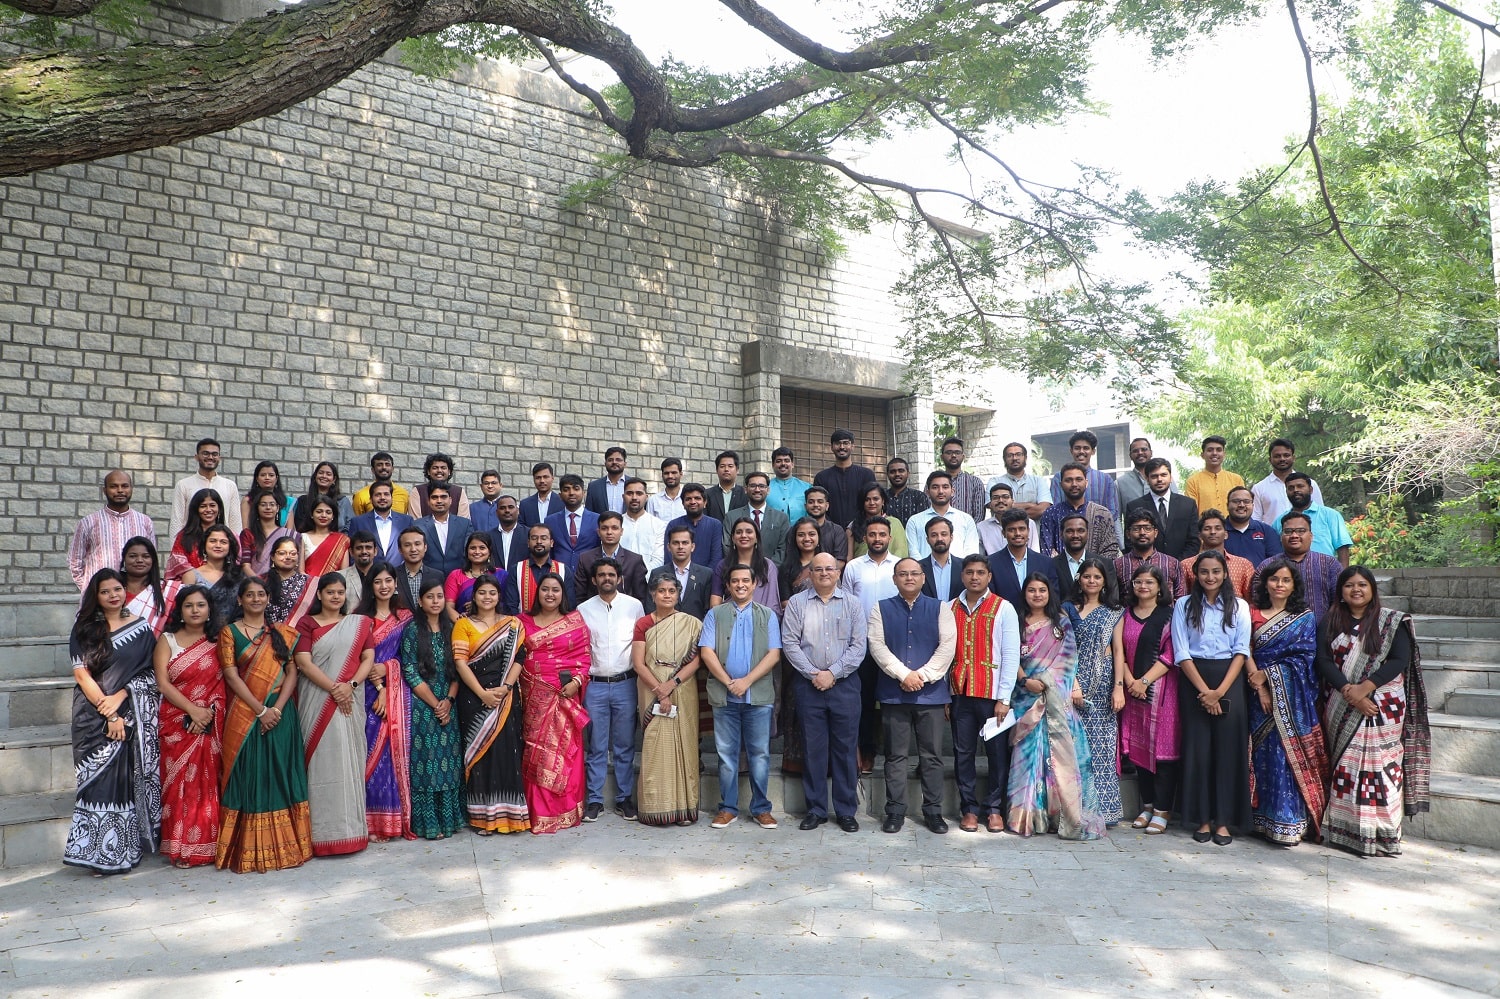 A snapshot of IIMB faculty members, and staff and participants of MGNF at the valedictory ceremony, seen here with Prof. Rishikesha T Krishnan, Director, IIM Bangalore.